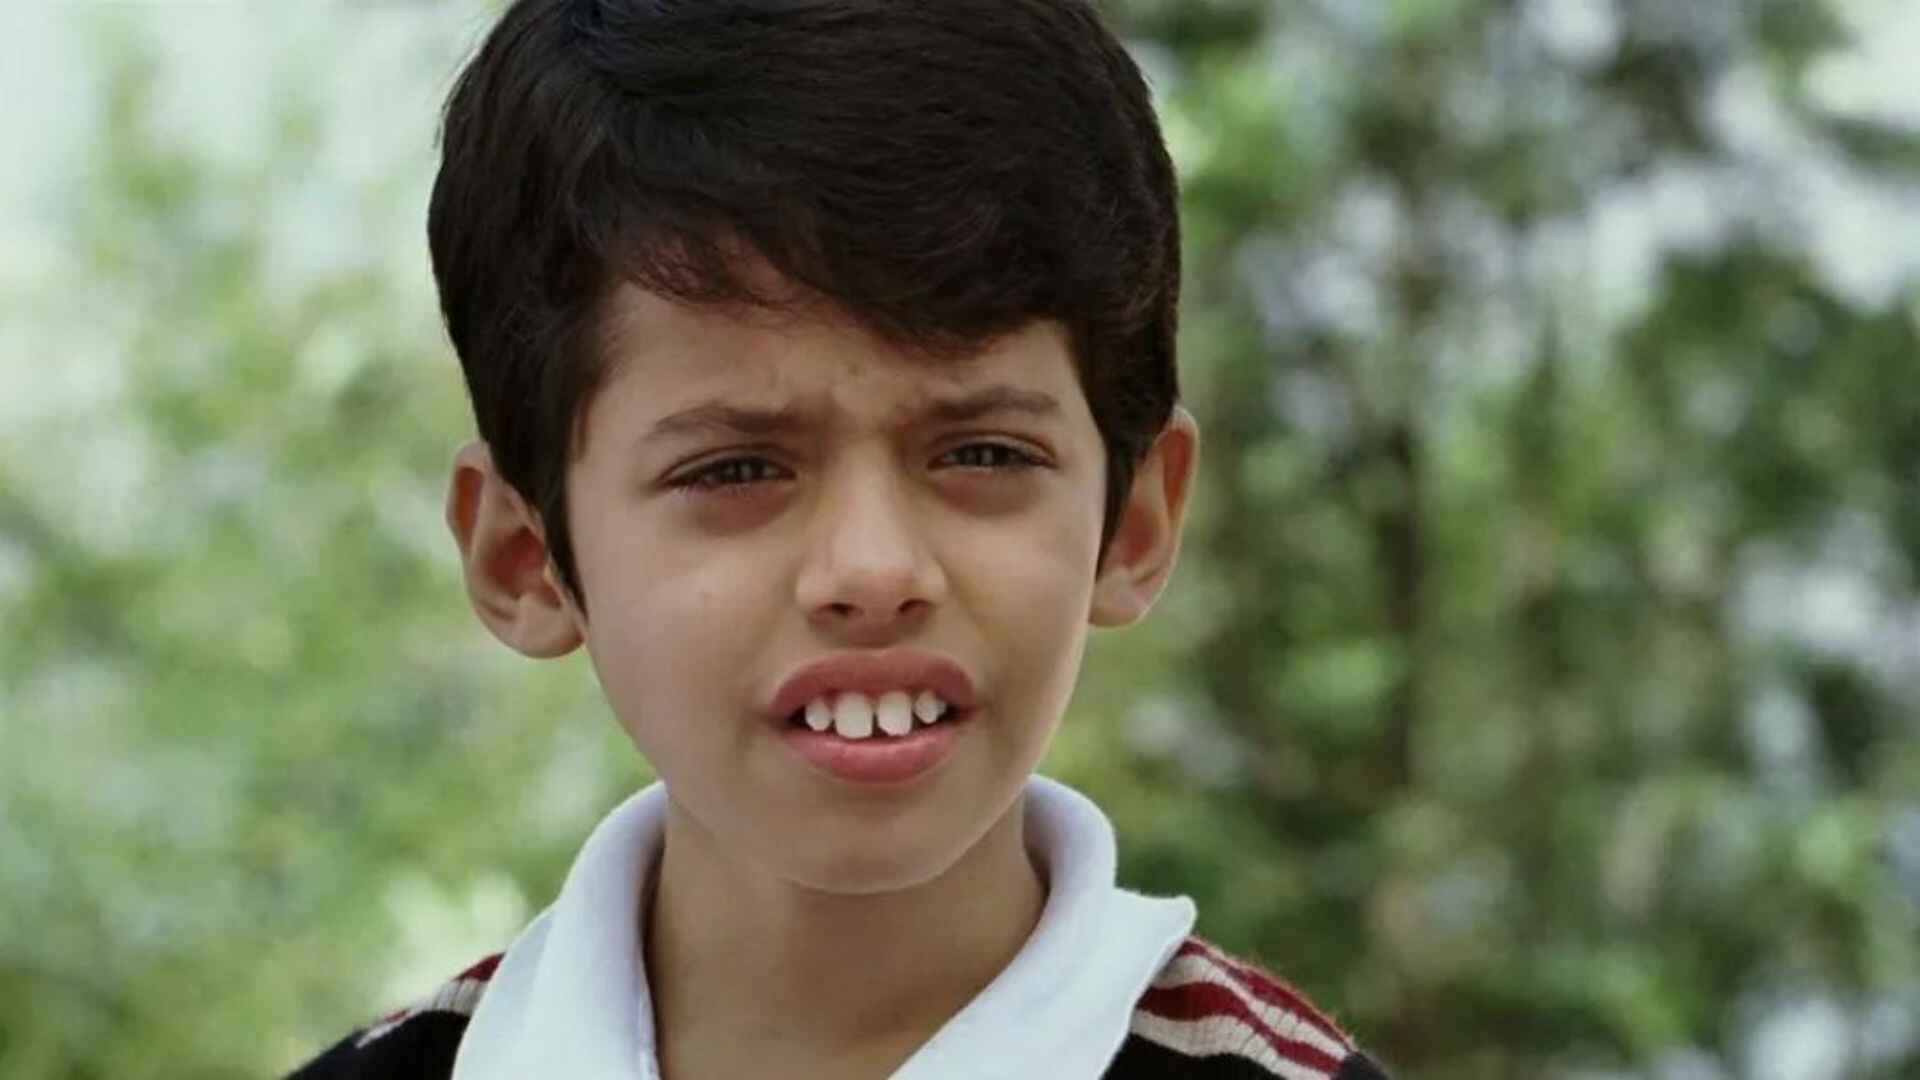 Watch: Darsheel Safary’s ‘Taare Zameen Par’ Audition Tape Resurfaces